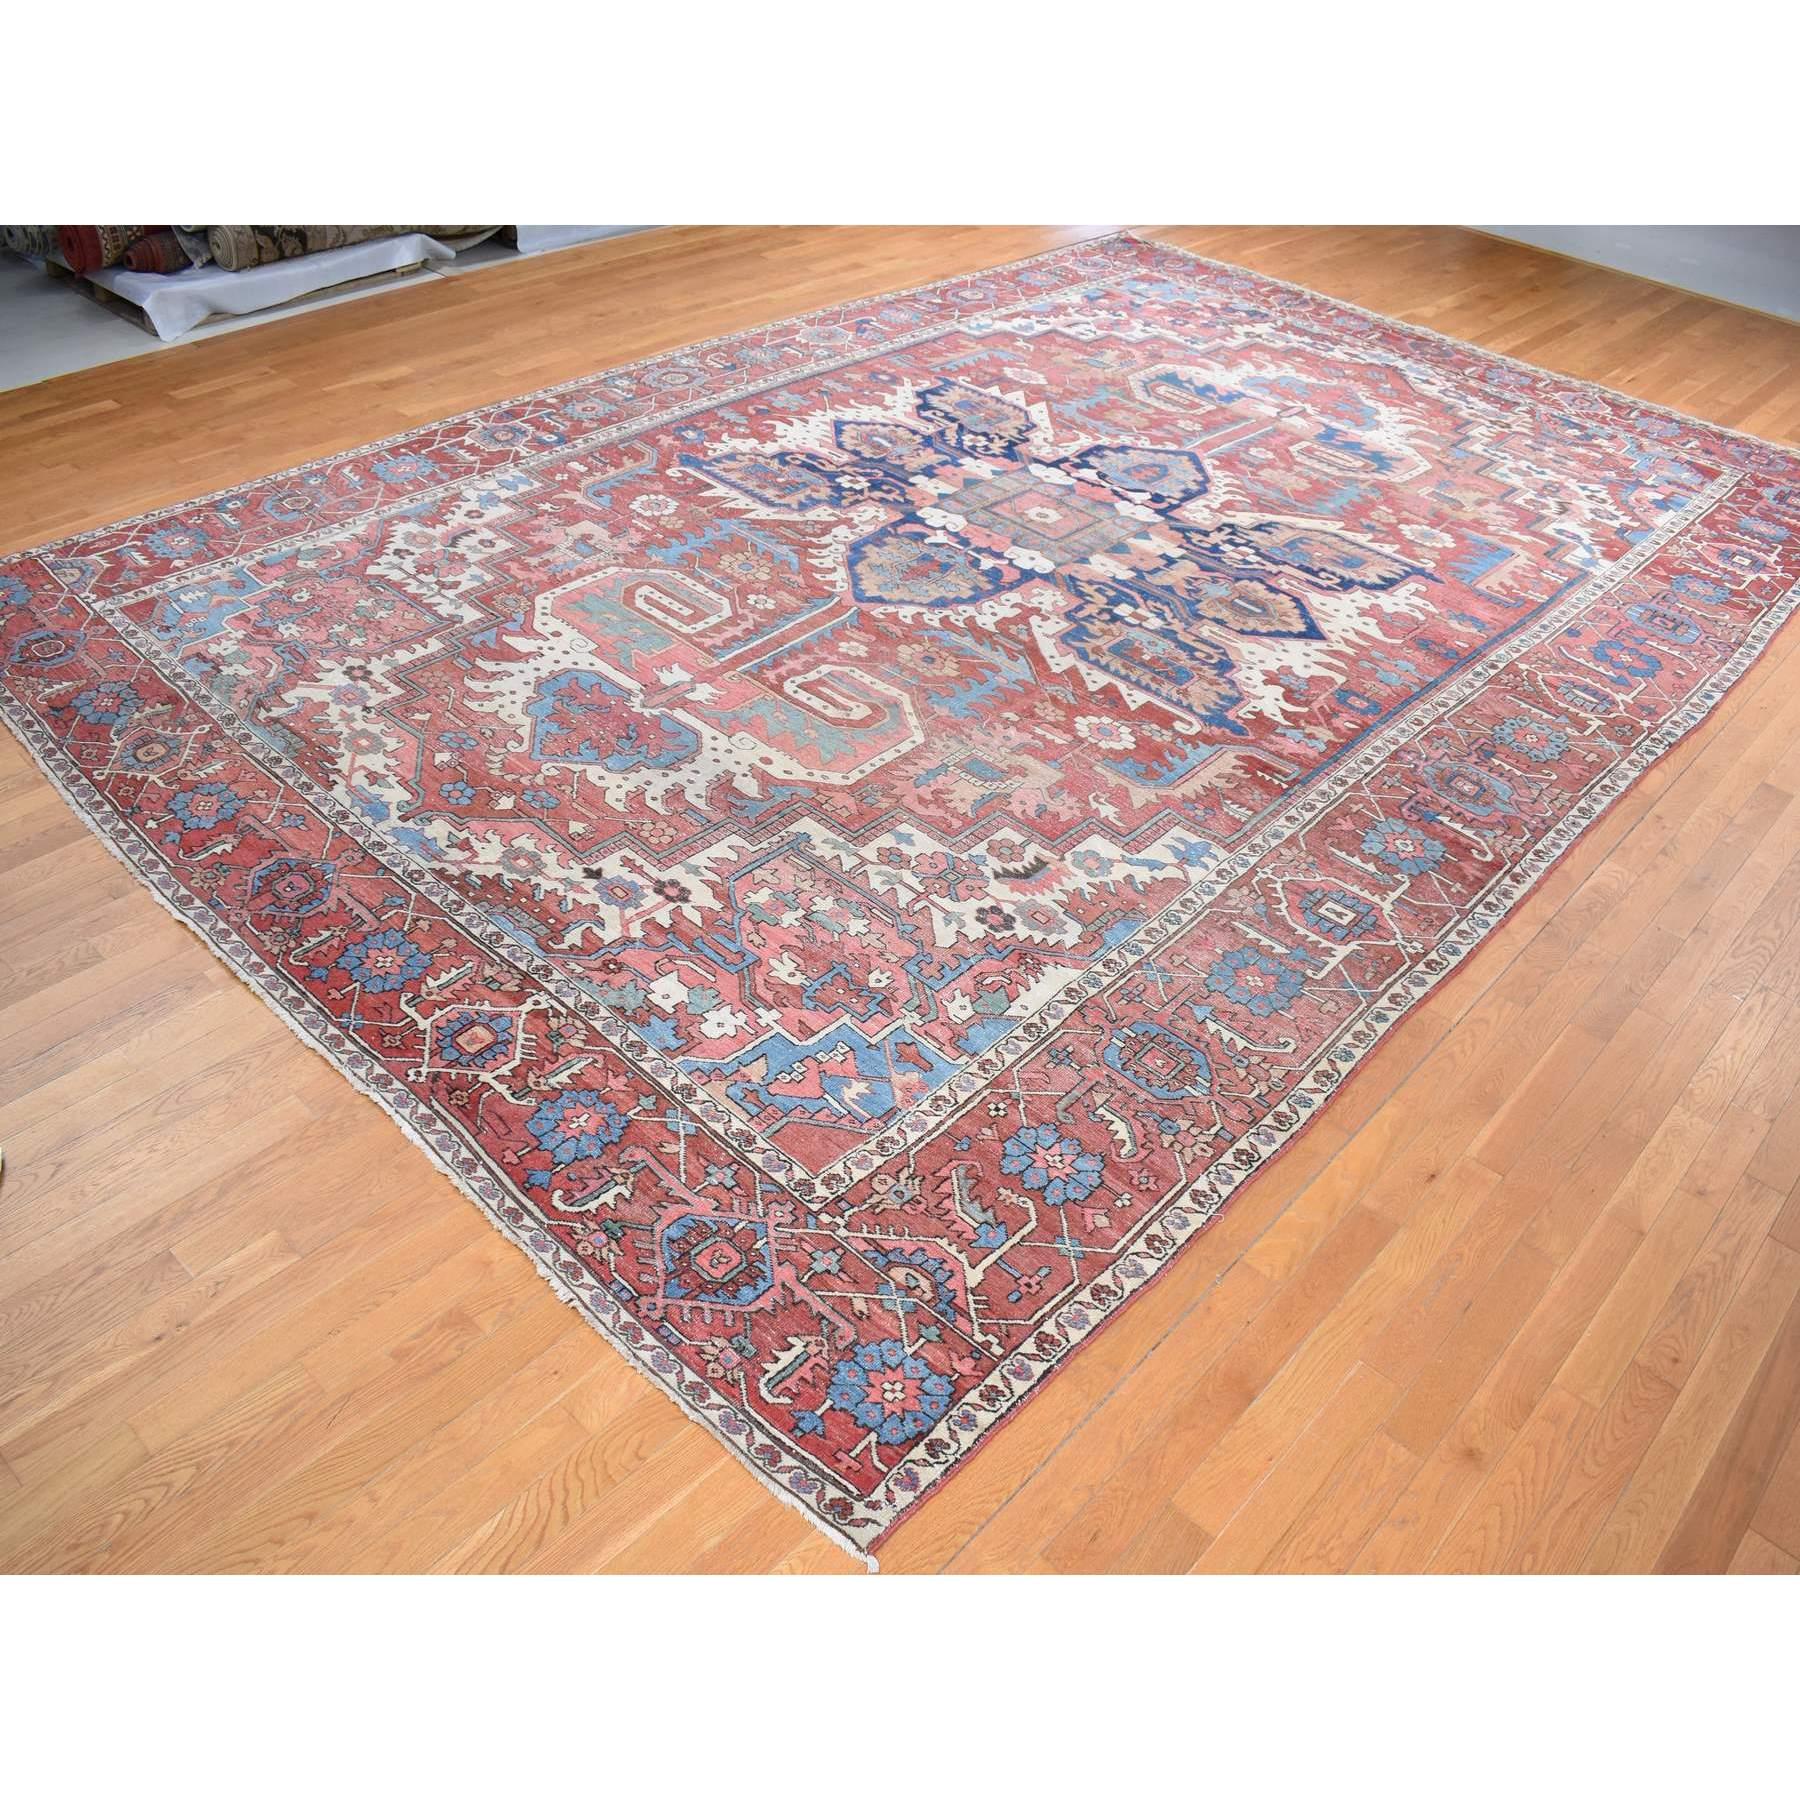 Medieval Blush Red Antique Persian Serapi Heriz Even Wear Hand Knotted Wool Oversized Rug For Sale